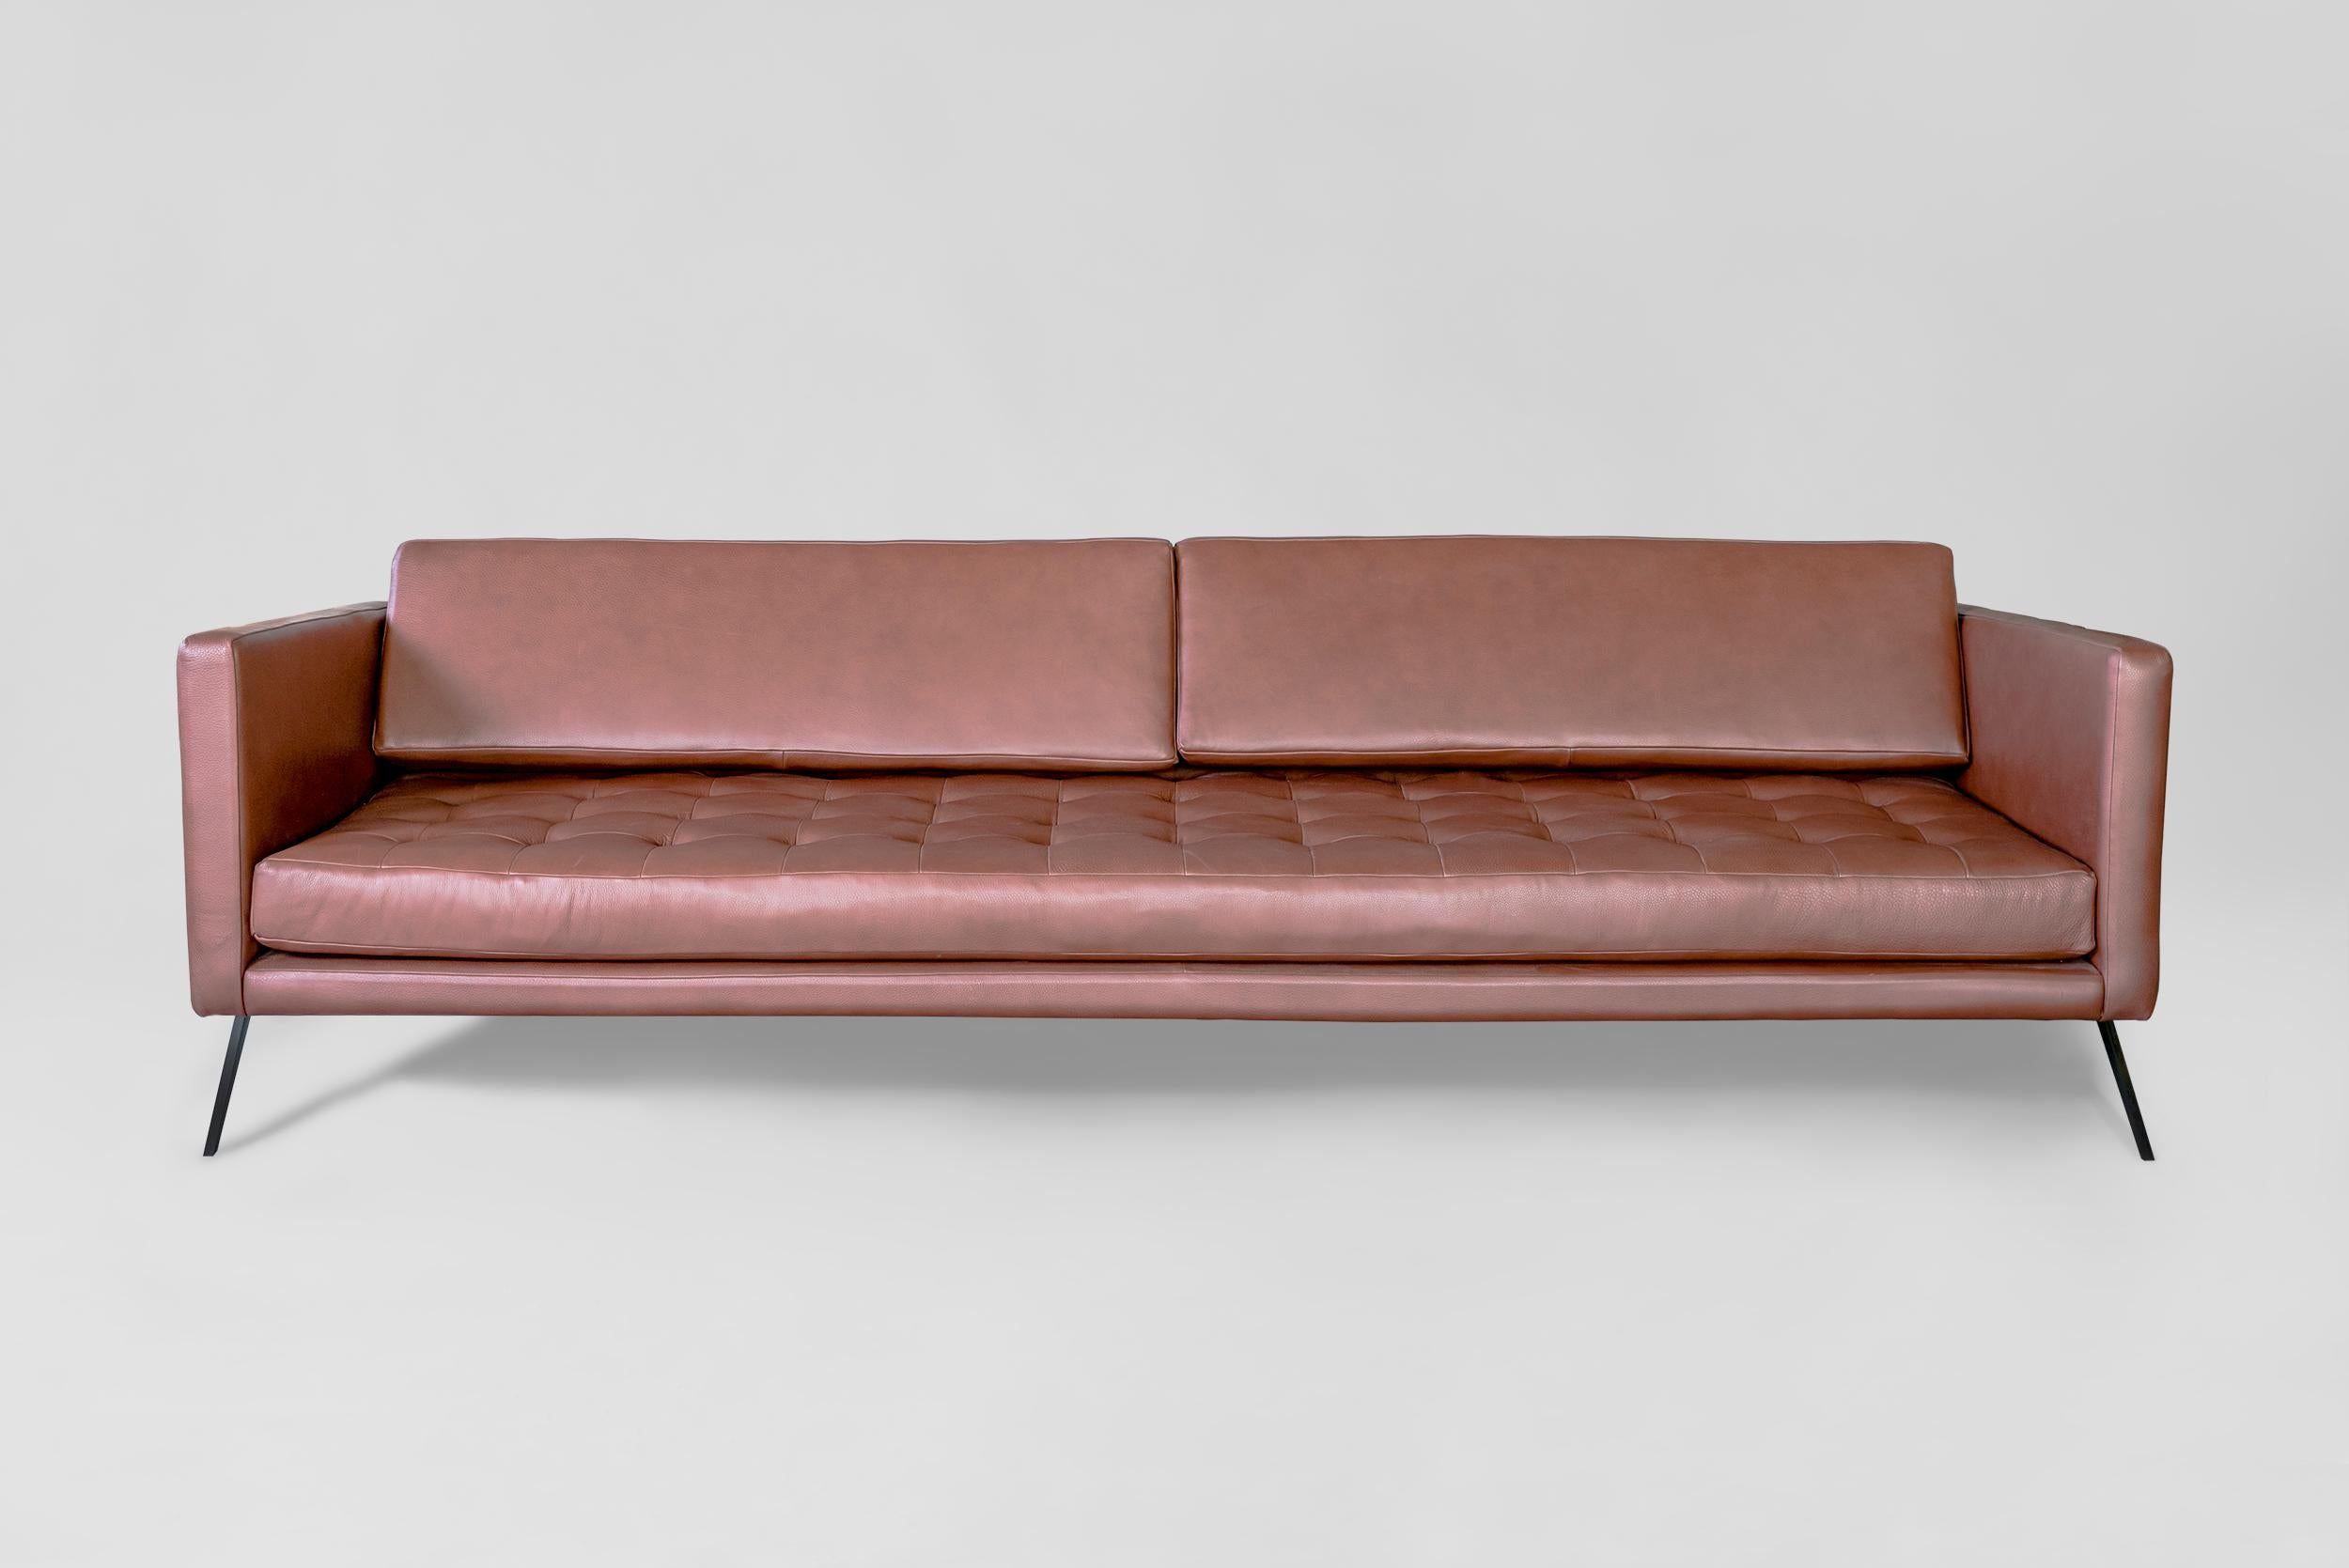 Mantis sofa by Atra Design
Dimensions: D 240 x W 92 x H 74 cm
Materials: leather, steel
Available in leather or fabric.

Atra Design
We are Atra, a furniture brand produced by Atra form a mexico city–based high end production facility that also